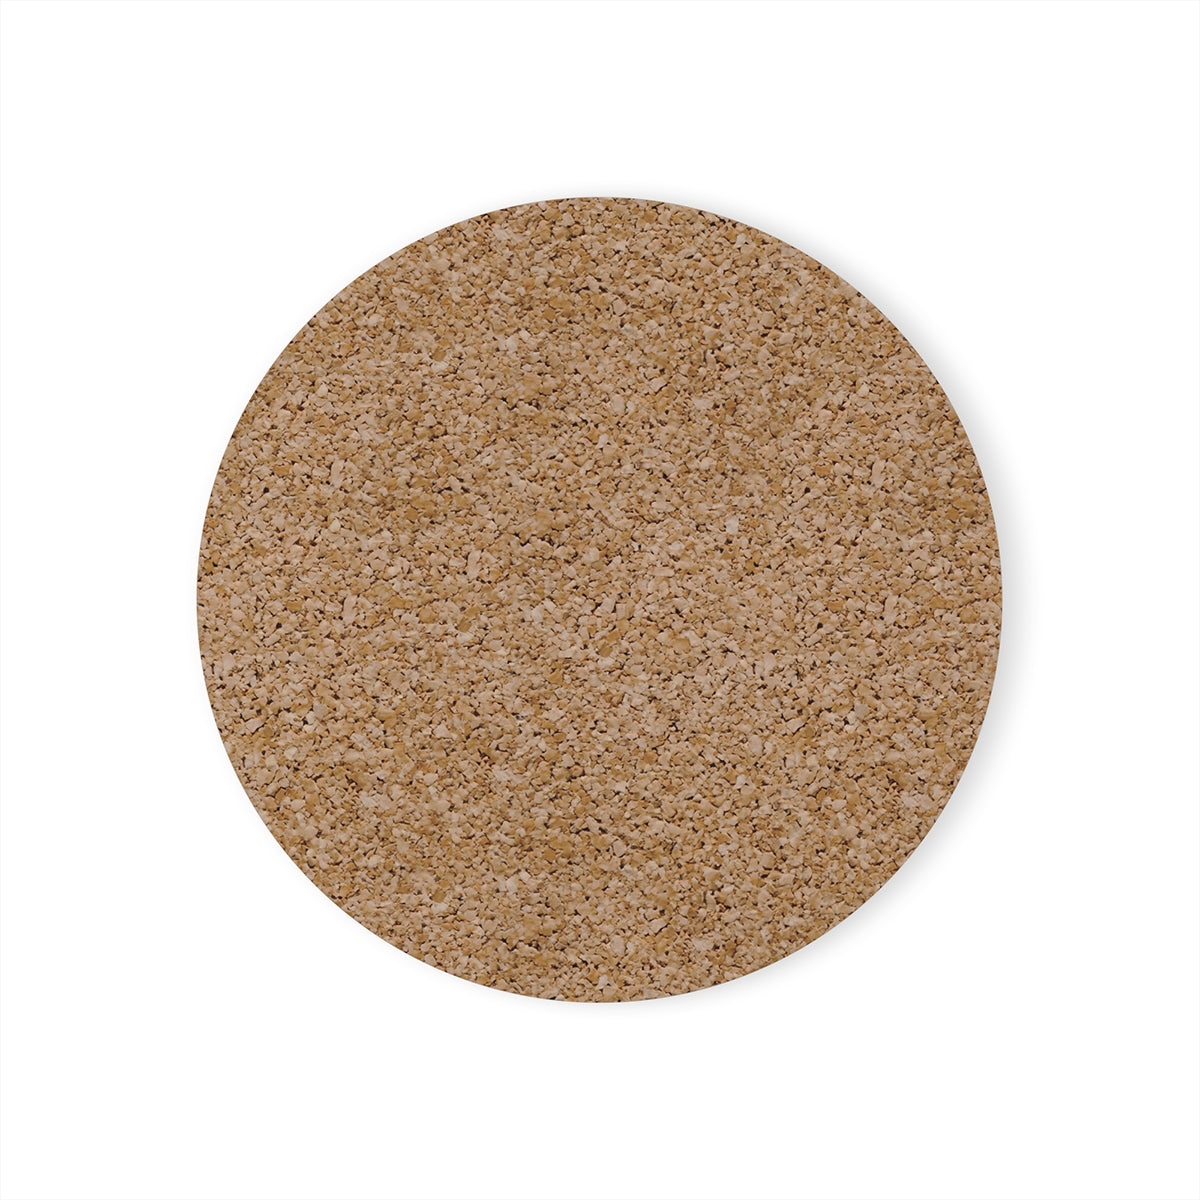 Back View of Round-shaped Cork Back Coaster with Custom Pet Portrait Print - Petclusiv